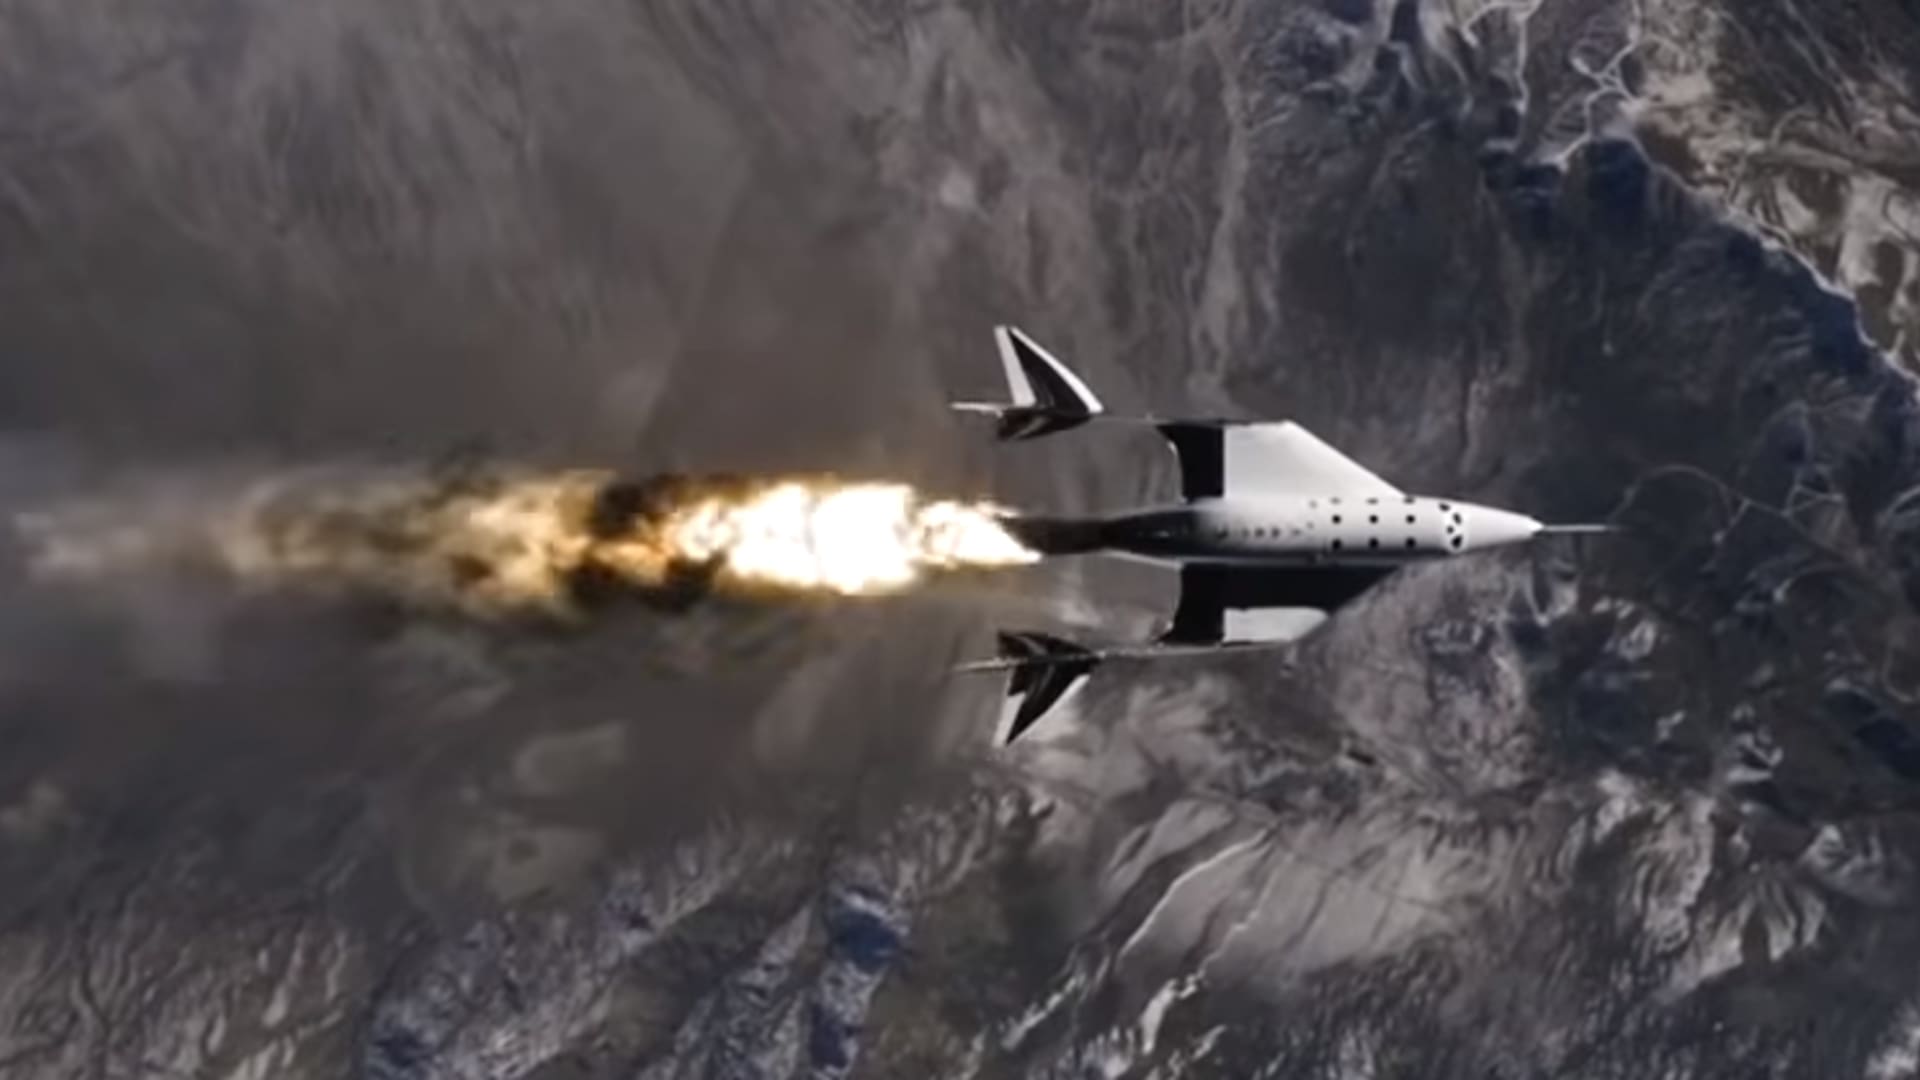 Virgin Galactic's spacecraft Unity fires its rocket engine and heads to space on Feb. 22, 2019.